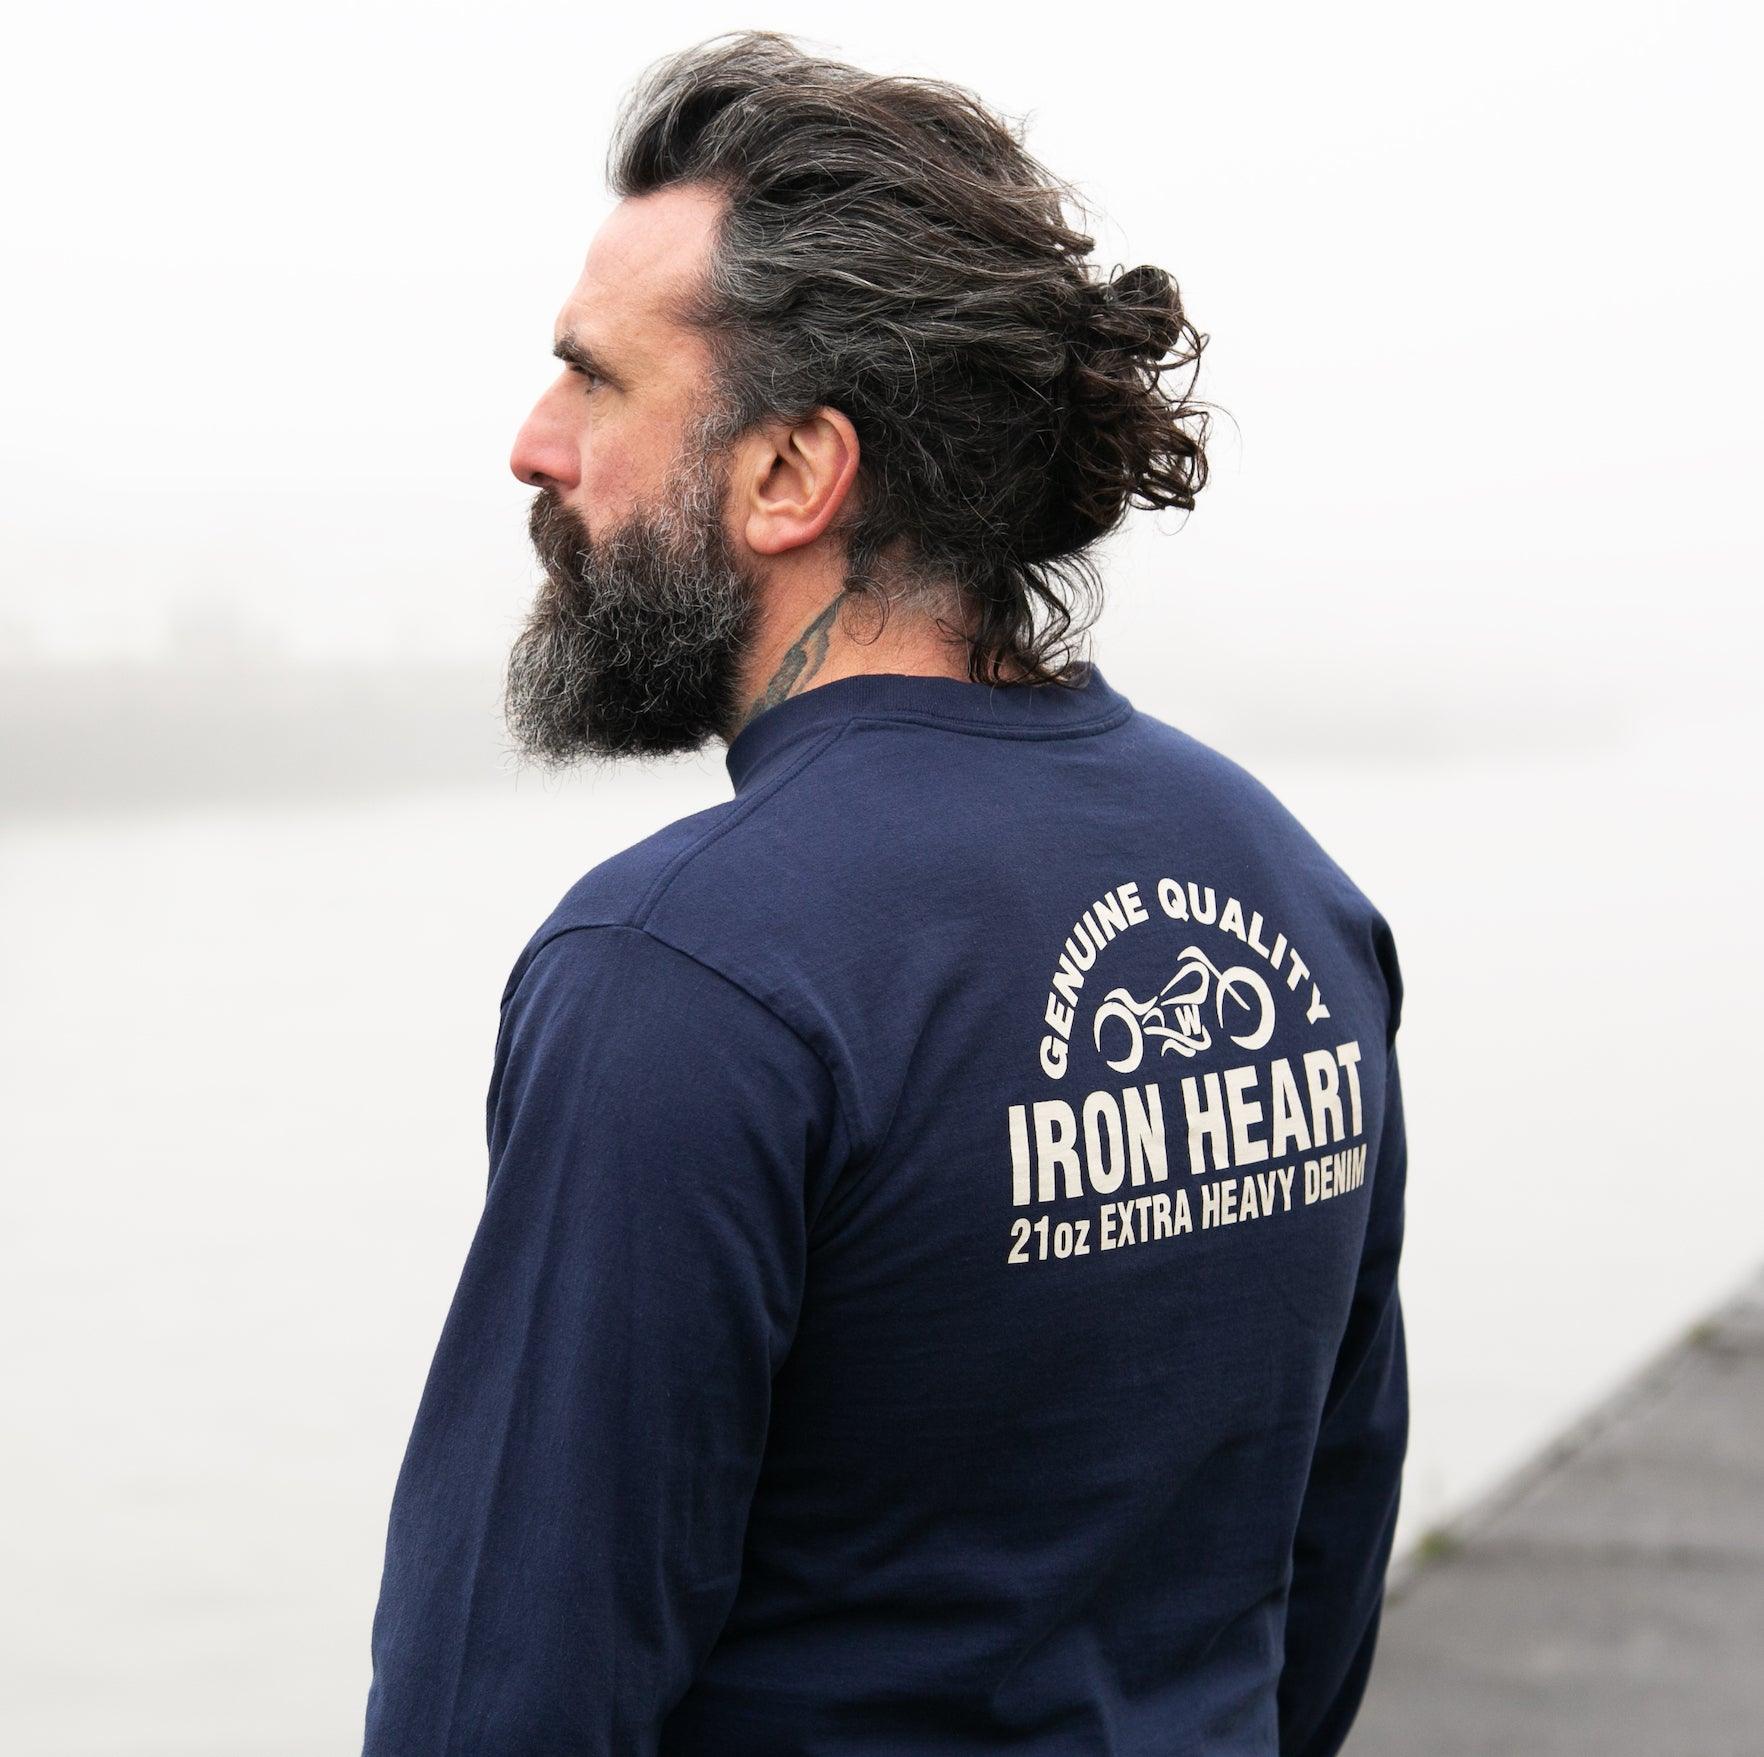 Image showing the IHTL-2302-NAV - 7.5oz Printed Loopwheel Crew Neck Long Sleeved T-Shirt - Navy which is a T-Shirts described by the following info Bargain, Released and sold on the IRON HEART GERMANY online store